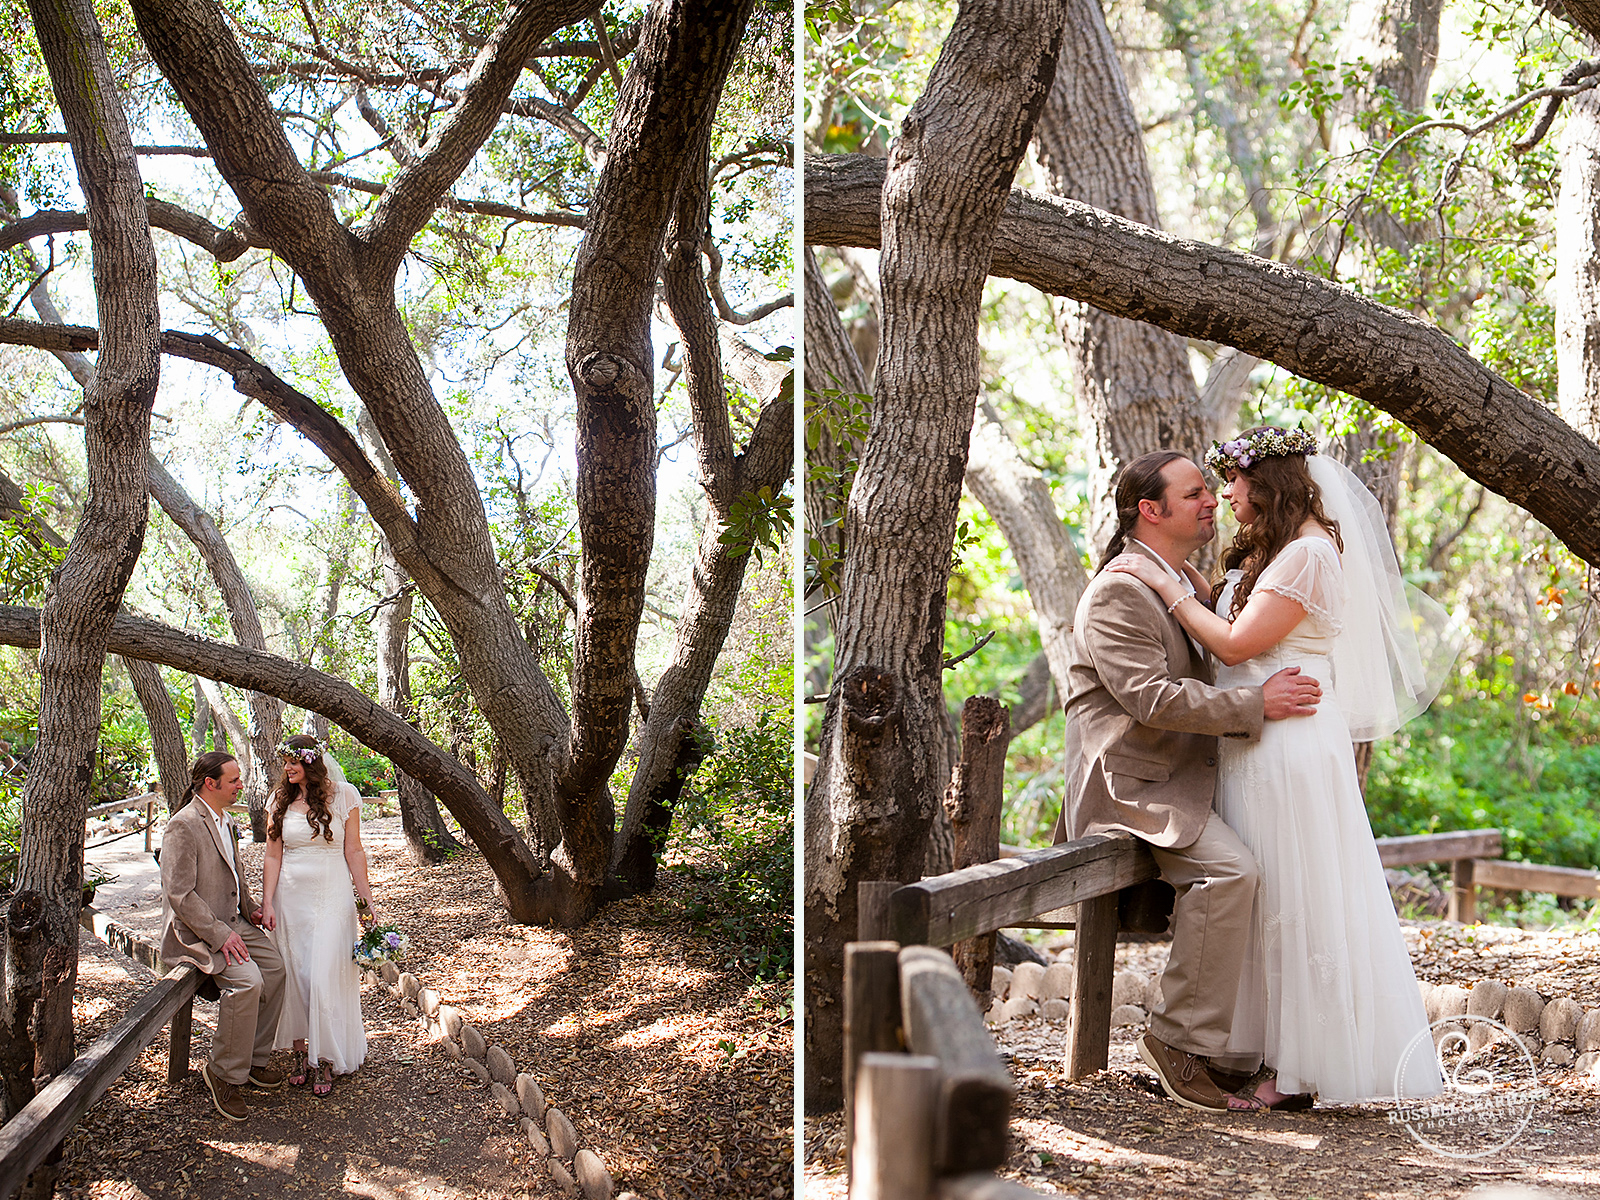 Wedding Couple in Magical Forest – Anaheim Hills Outdoor Wedding  – Russell Gearhart Photography – www.gearhartphoto.com  